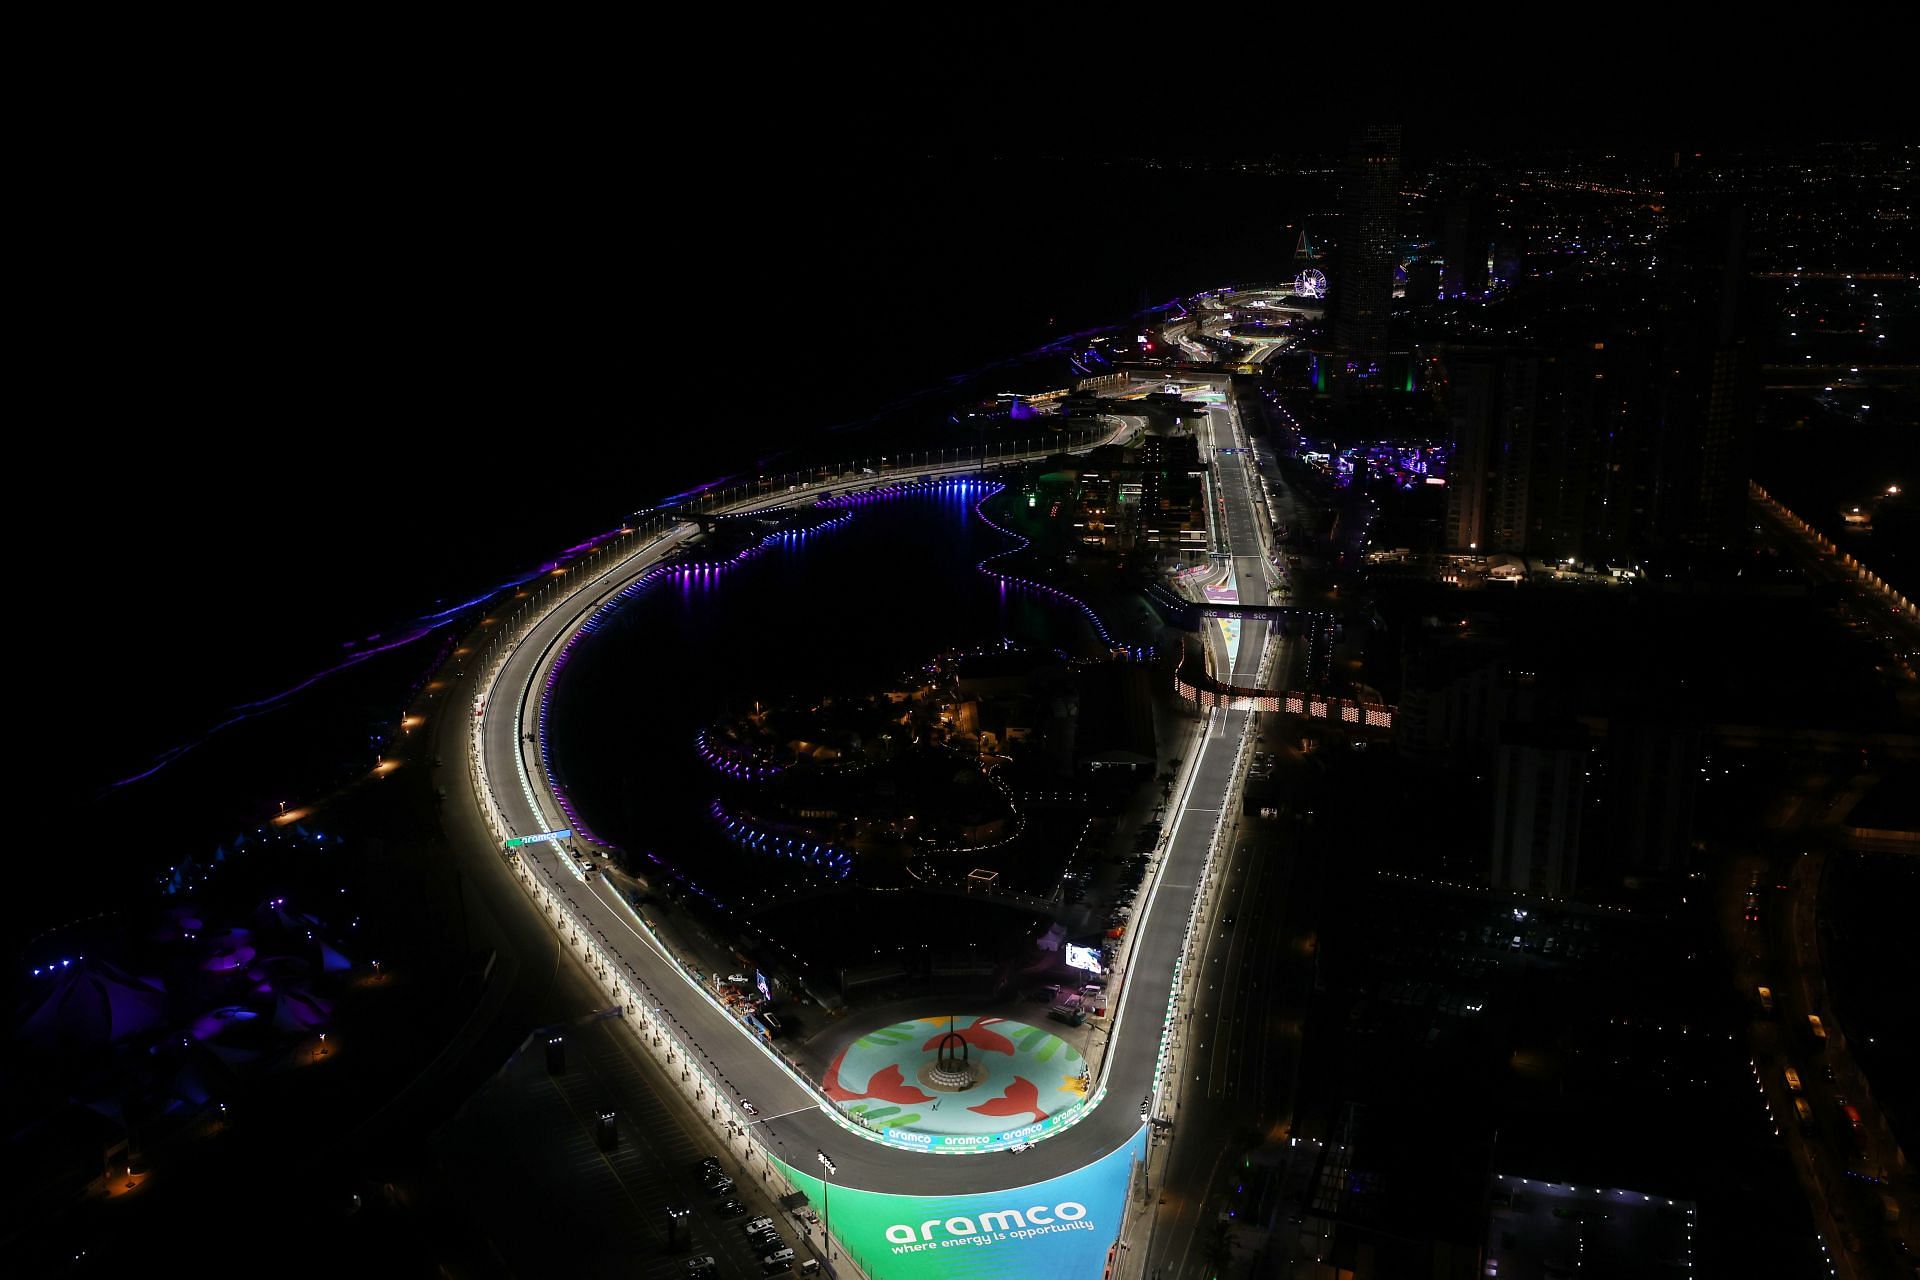 The unforgiving circuit at Jeddah is going to yield a lot of action throughout the race